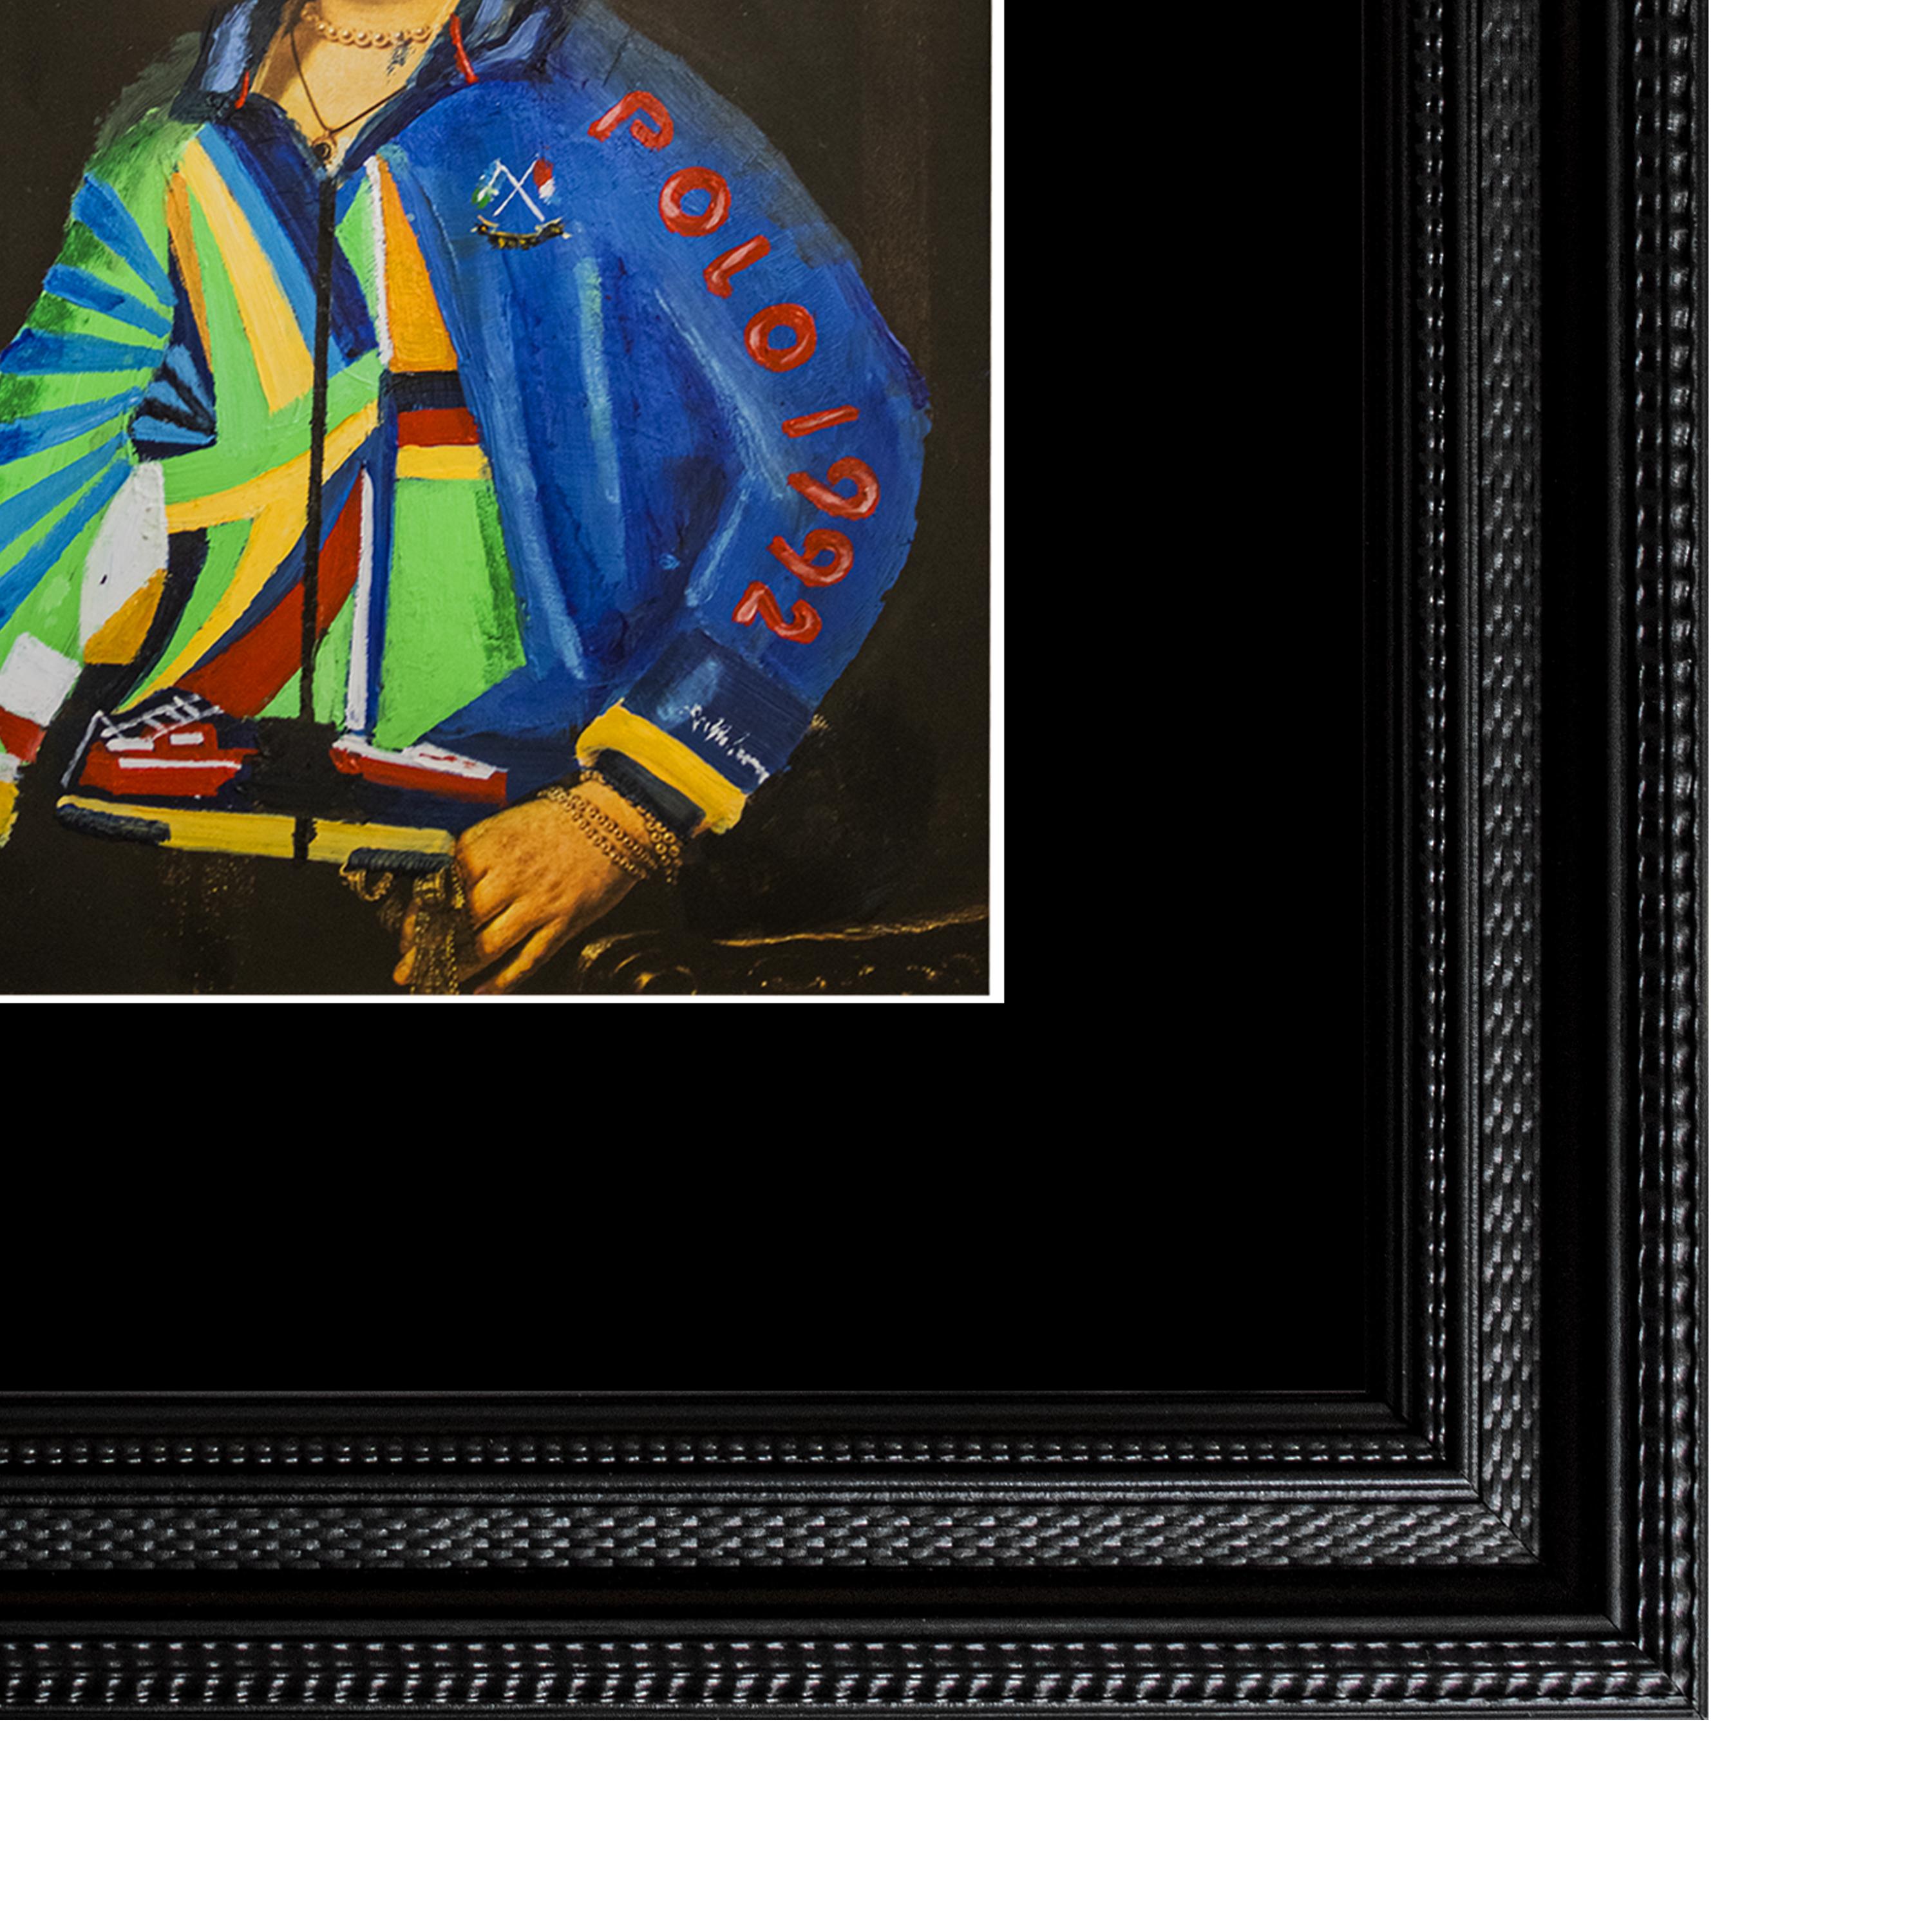 Belongs to the Ralph Lauren collection by Manuel Cruz, in which the artist uses the reproduction on paper from his history books of the painting “Retrato de Maria Trip” by Rembrandt in which he intervenes with acrylics and reinvents with Ralph